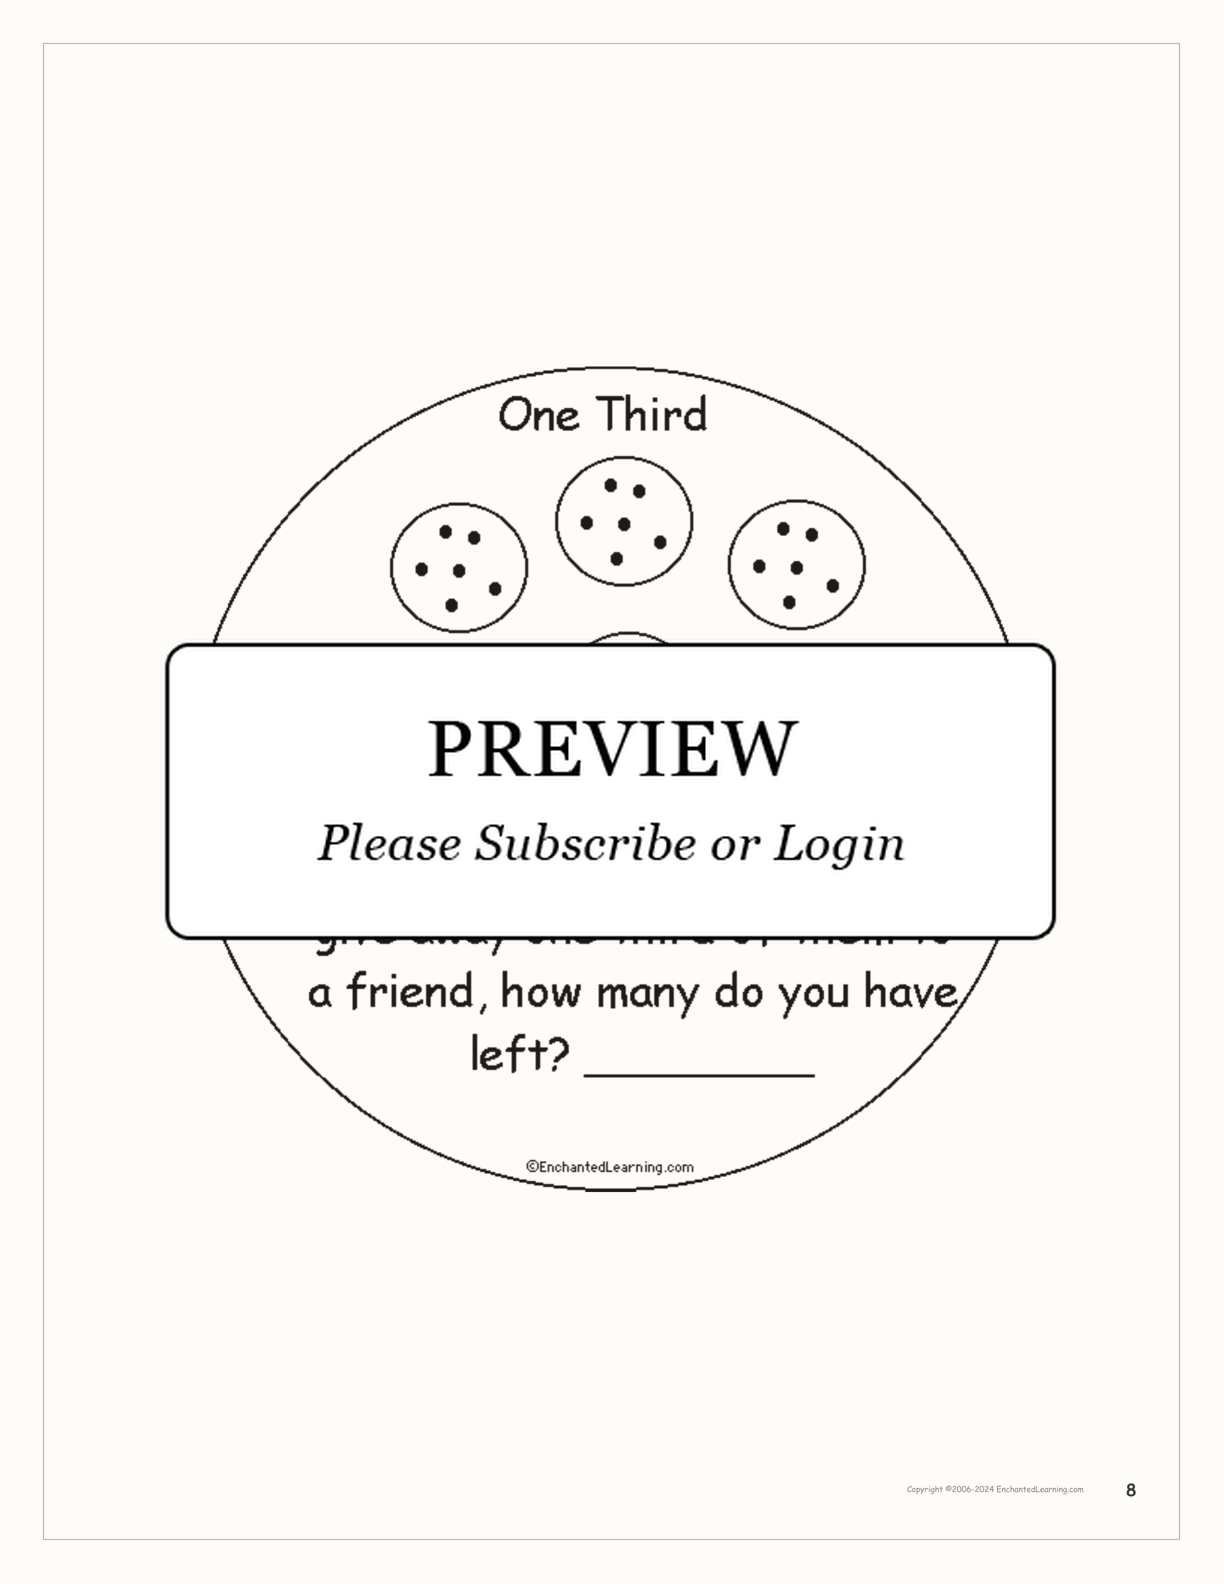 One Third: A Book on Fractions interactive printout page 8